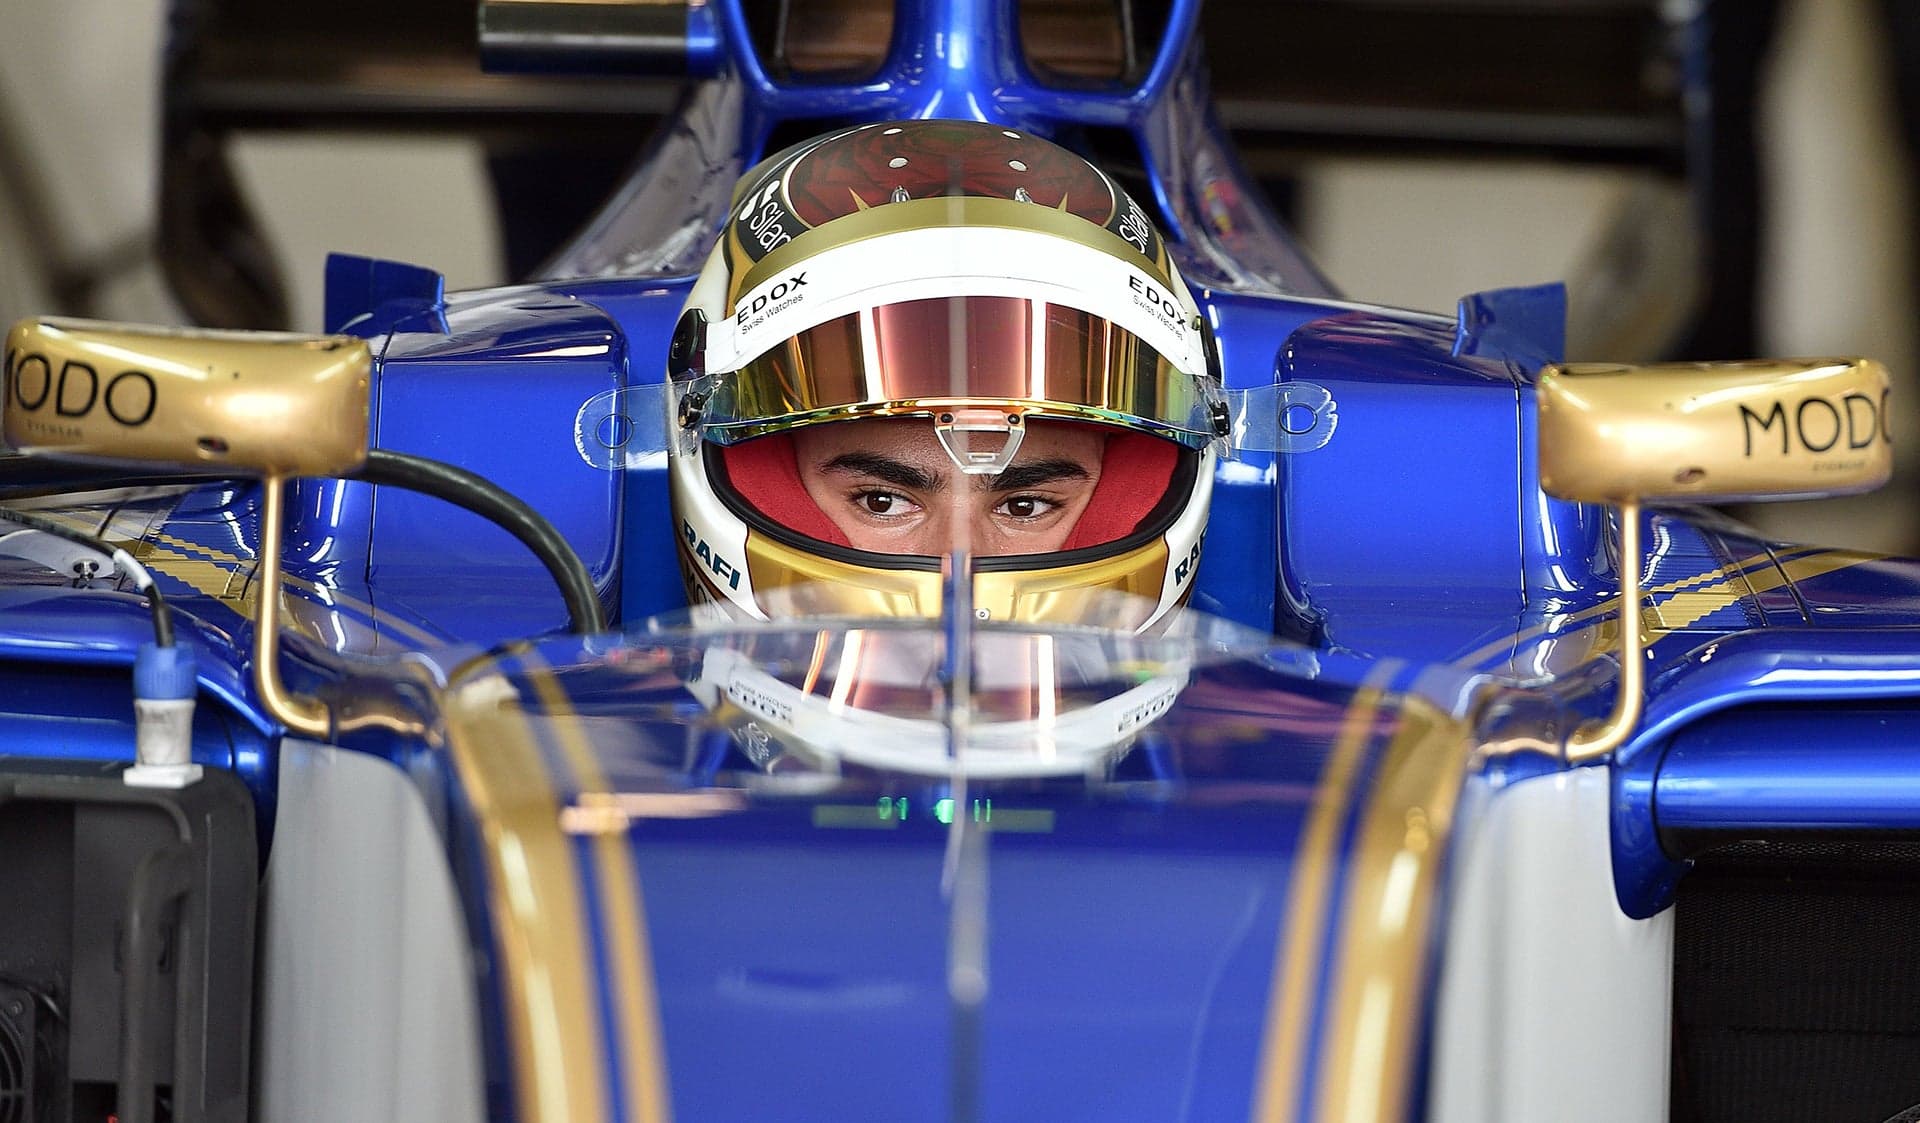 Pascal Wehrlein To Sit Out Chinese Grand Prix